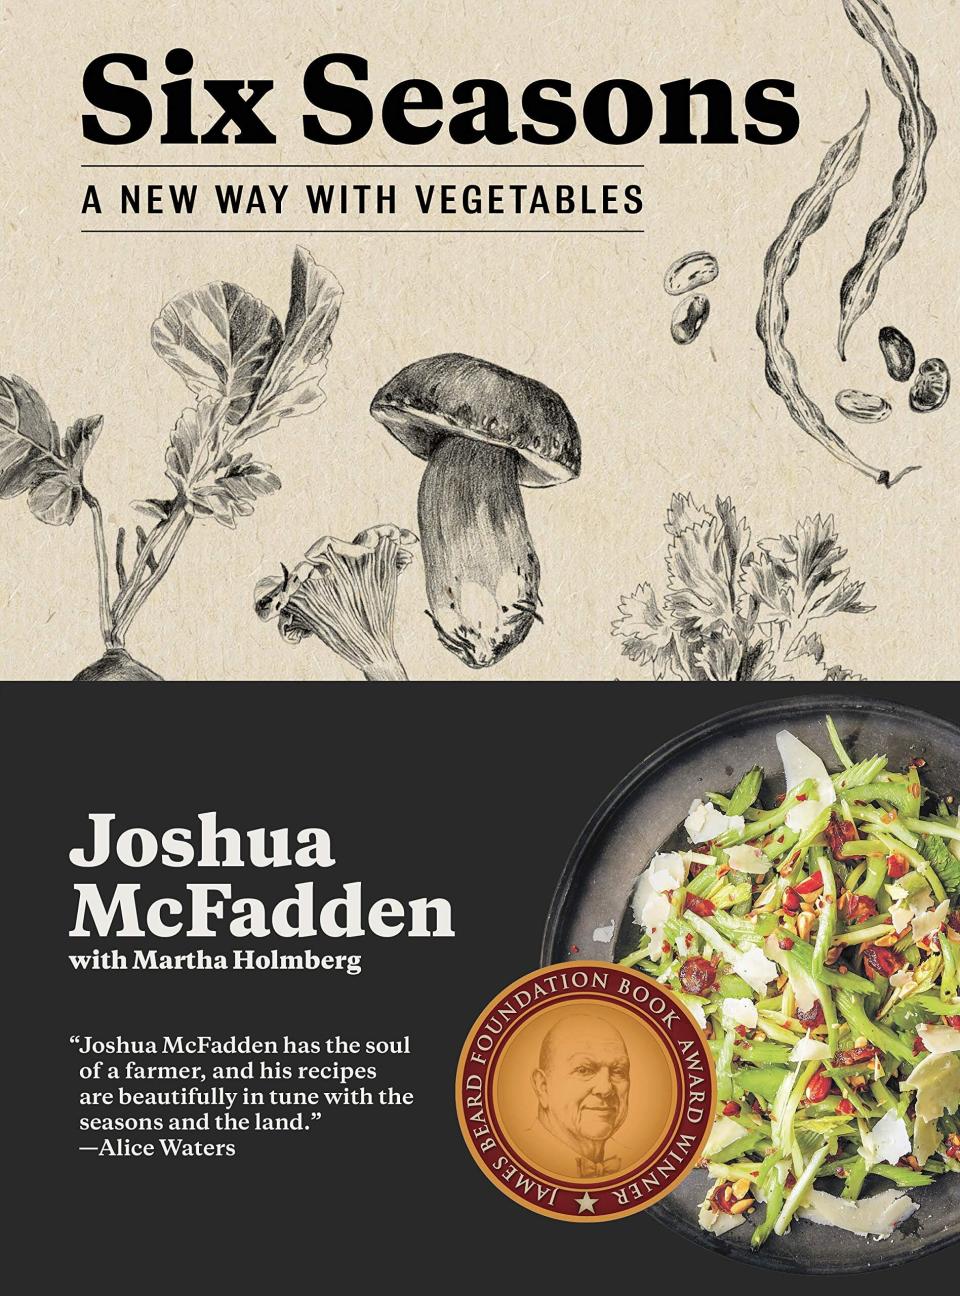 Forte also says Joshua McFadden&rsquo;s<a href="https://www.amazon.com/Six-Seasons-New-Way-Vegetables/dp/1579656315/ref=sr_1_1?keywords=Six+Seasons%3A+A+New+Way+with+Vegetables&amp;qid=1574961812&amp;sr=8-1"> &ldquo;Six Seasons: A New Way with Vegetables,"</a> a James Beard Award-winning book, is one of few collections she truly can&rsquo;t live without. &ldquo;I read this cookbook cover to cover,&rdquo; Forte told HuffPost<i>.</i> &ldquo;I have so many books, many that I spend some time with then hand off to friends, but I will always keep this book. It is smart and casual, and I love it.&rdquo; &lt;br&gt;&lt;br&gt;<strong>Buy </strong><a href="https://www.amazon.com/Six-Seasons-New-Way-Vegetables/dp/1579656315/ref=sr_1_1?keywords=Six+Seasons%3A+A+New+Way+with+Vegetables&amp;qid=1574961812&amp;sr=8-1"><strong>"Six Seasons: A New Way with Vegetables"﻿</strong></a><strong> from Amazon.</strong>